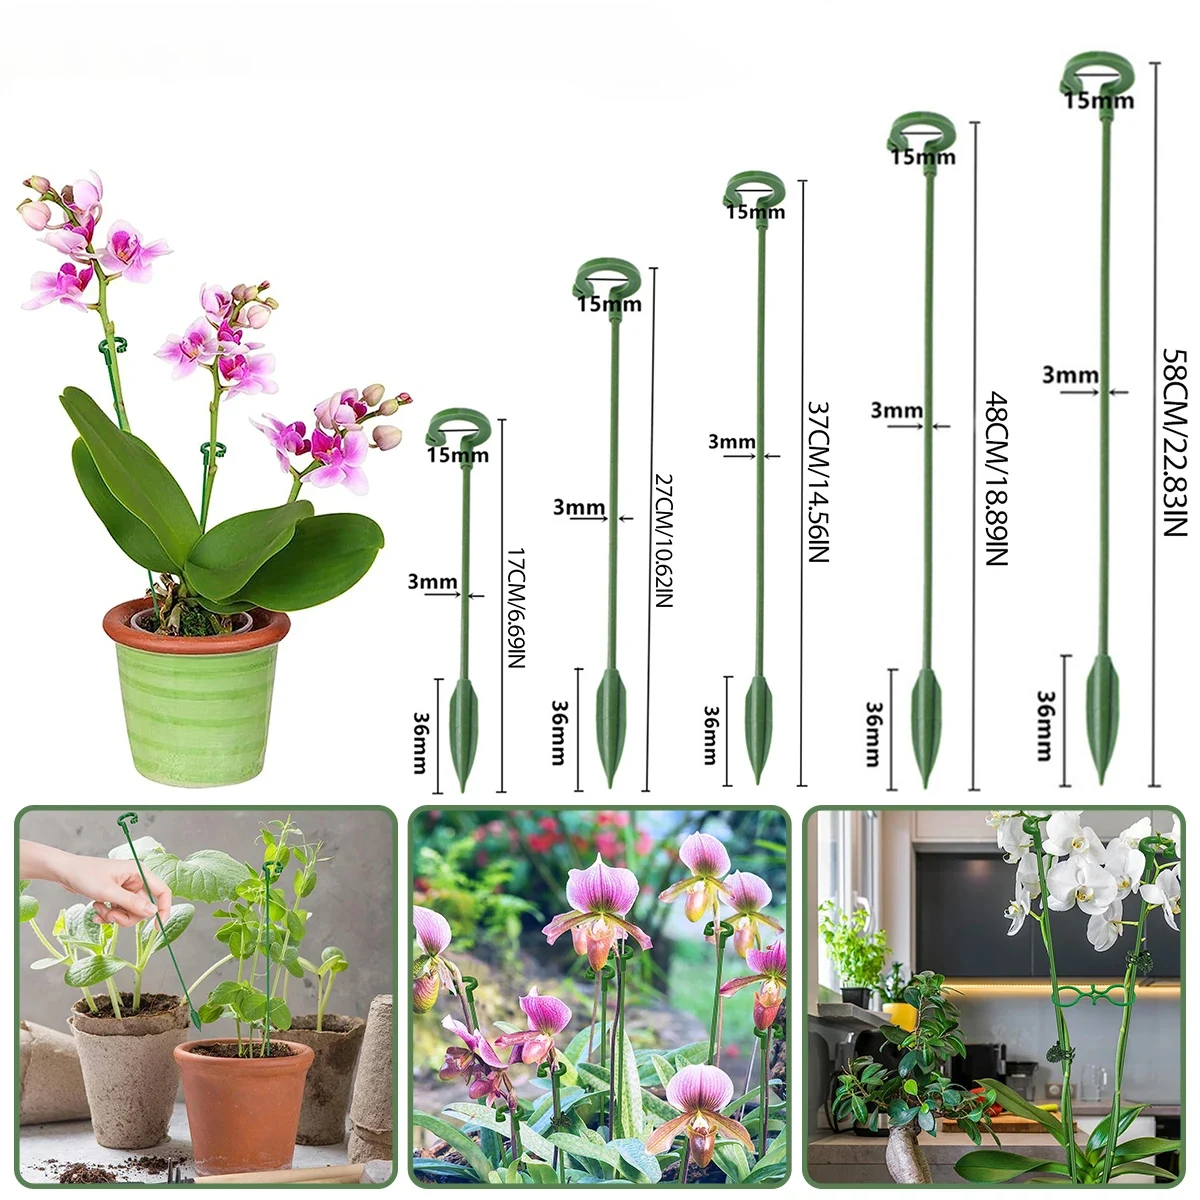 

10pcs PVC Plant Supports Flower Stand Reusable Protection Fixing Tool Gardening Supplies For Vegetable Holder Bracket Tools